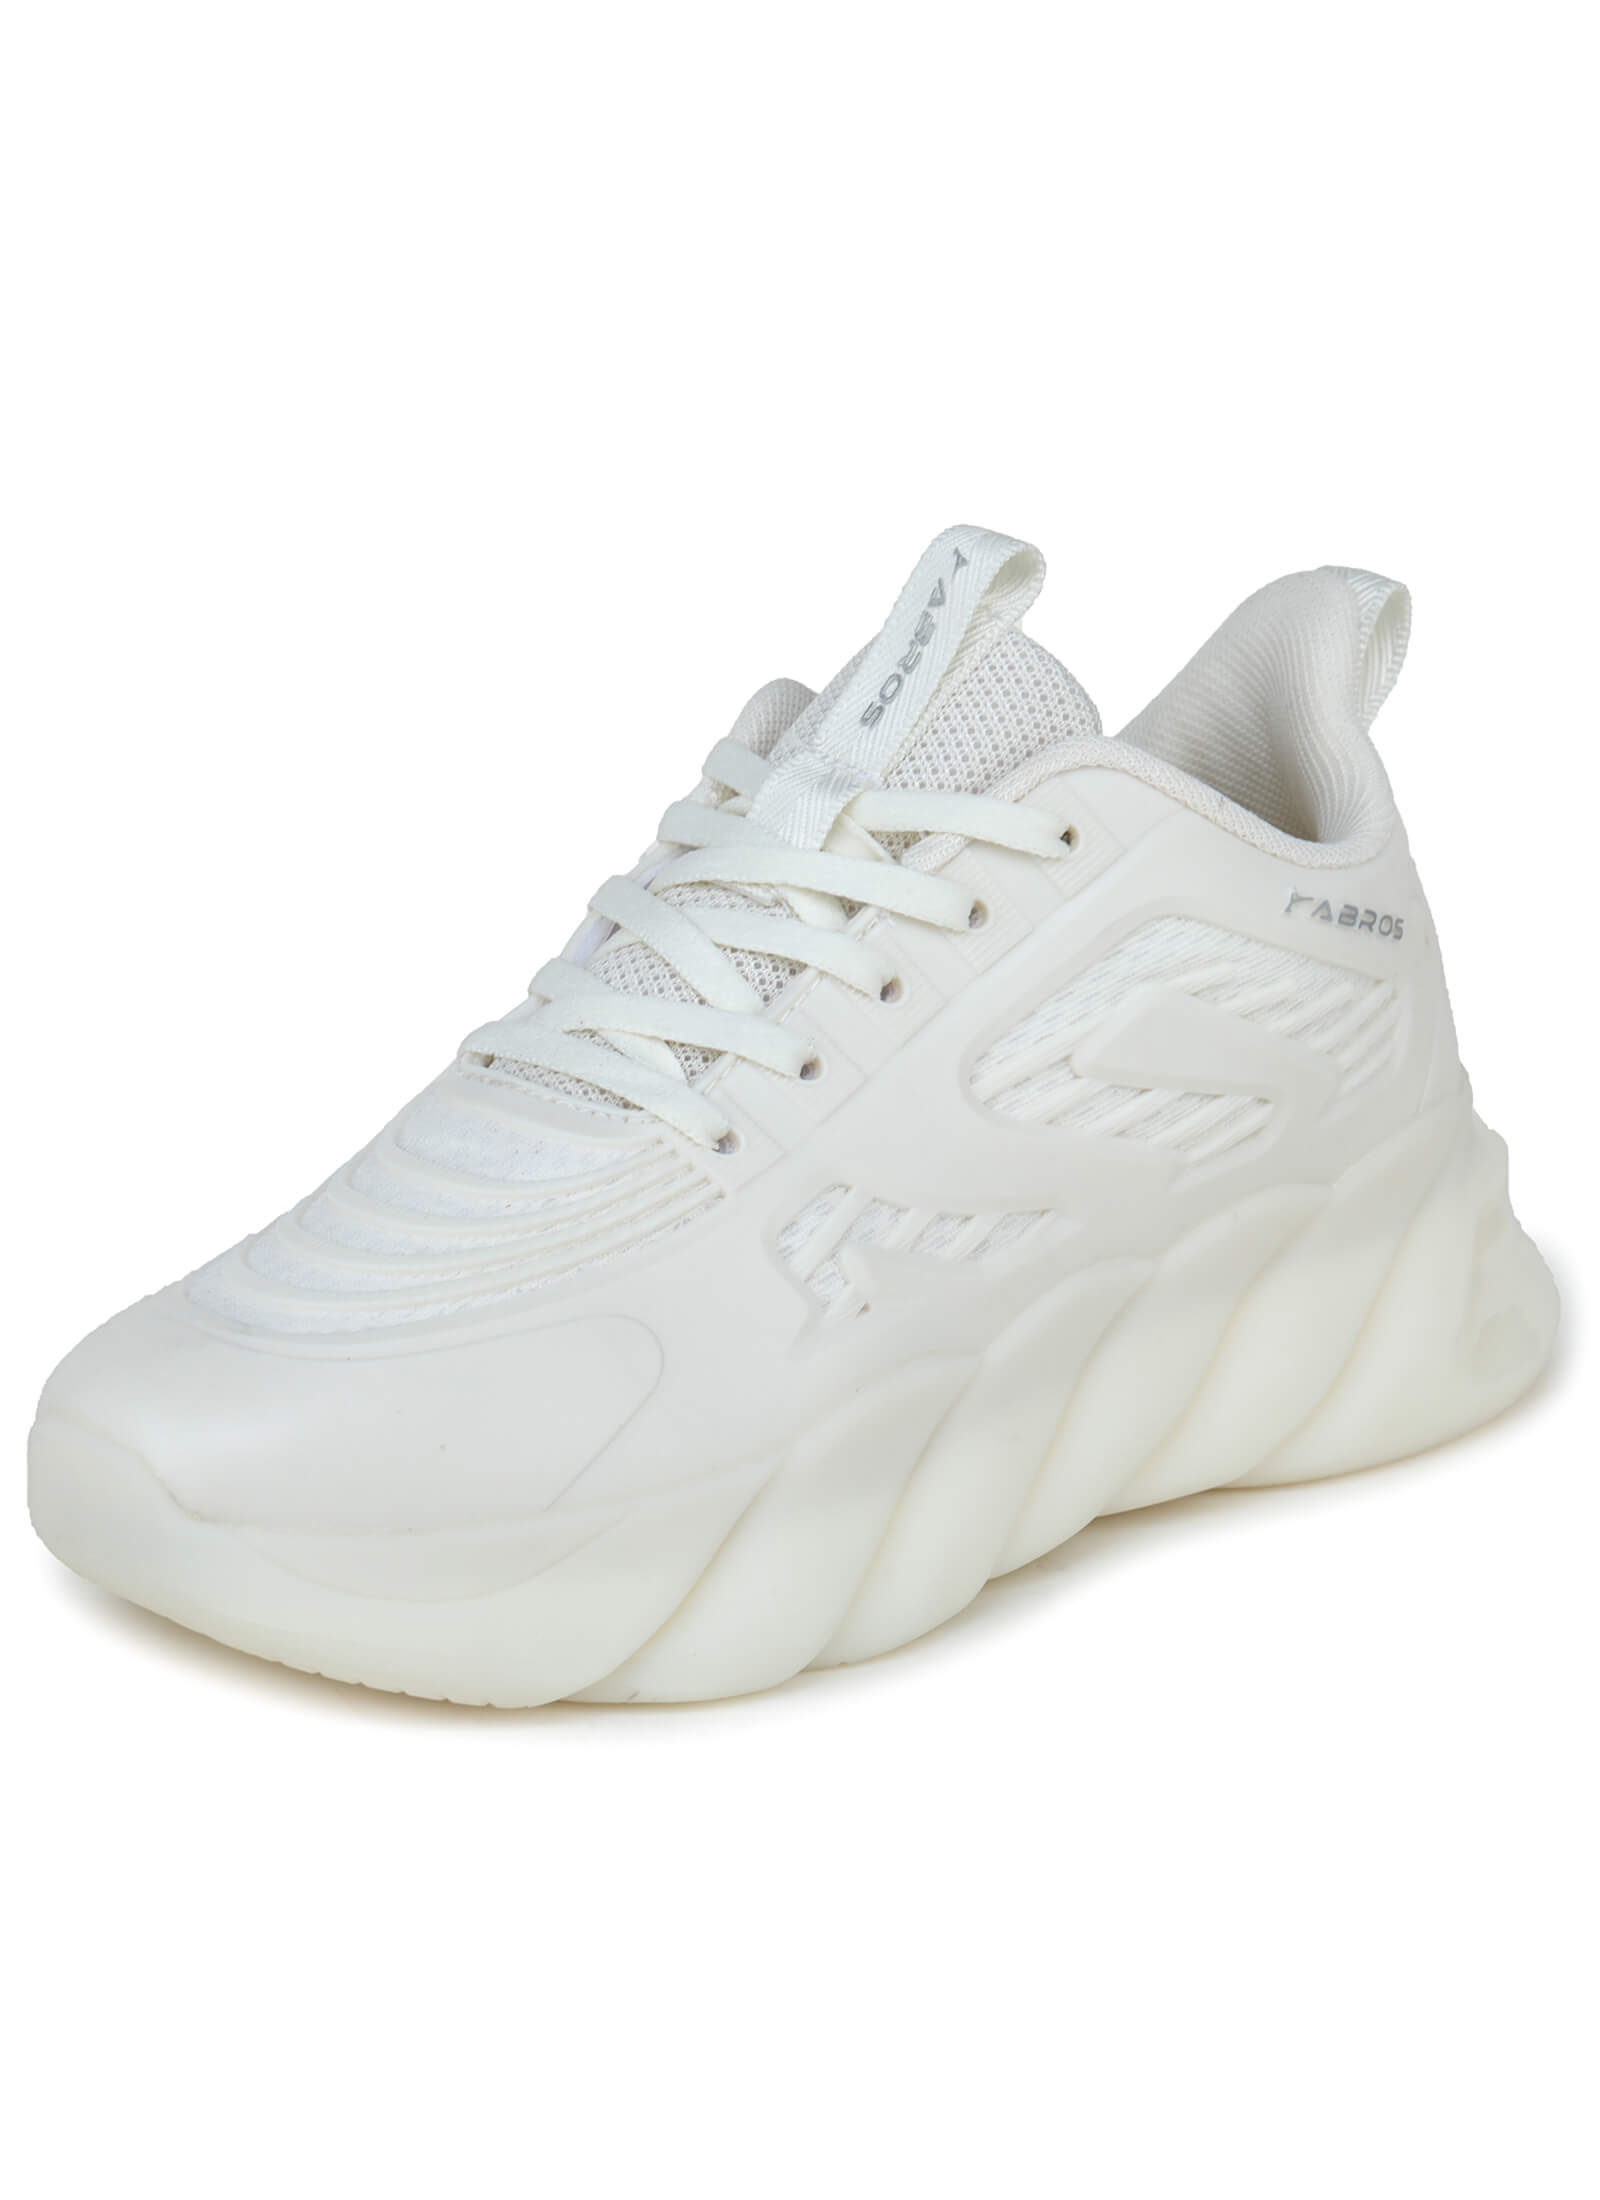 Angel-2 Sports Shoes For Women